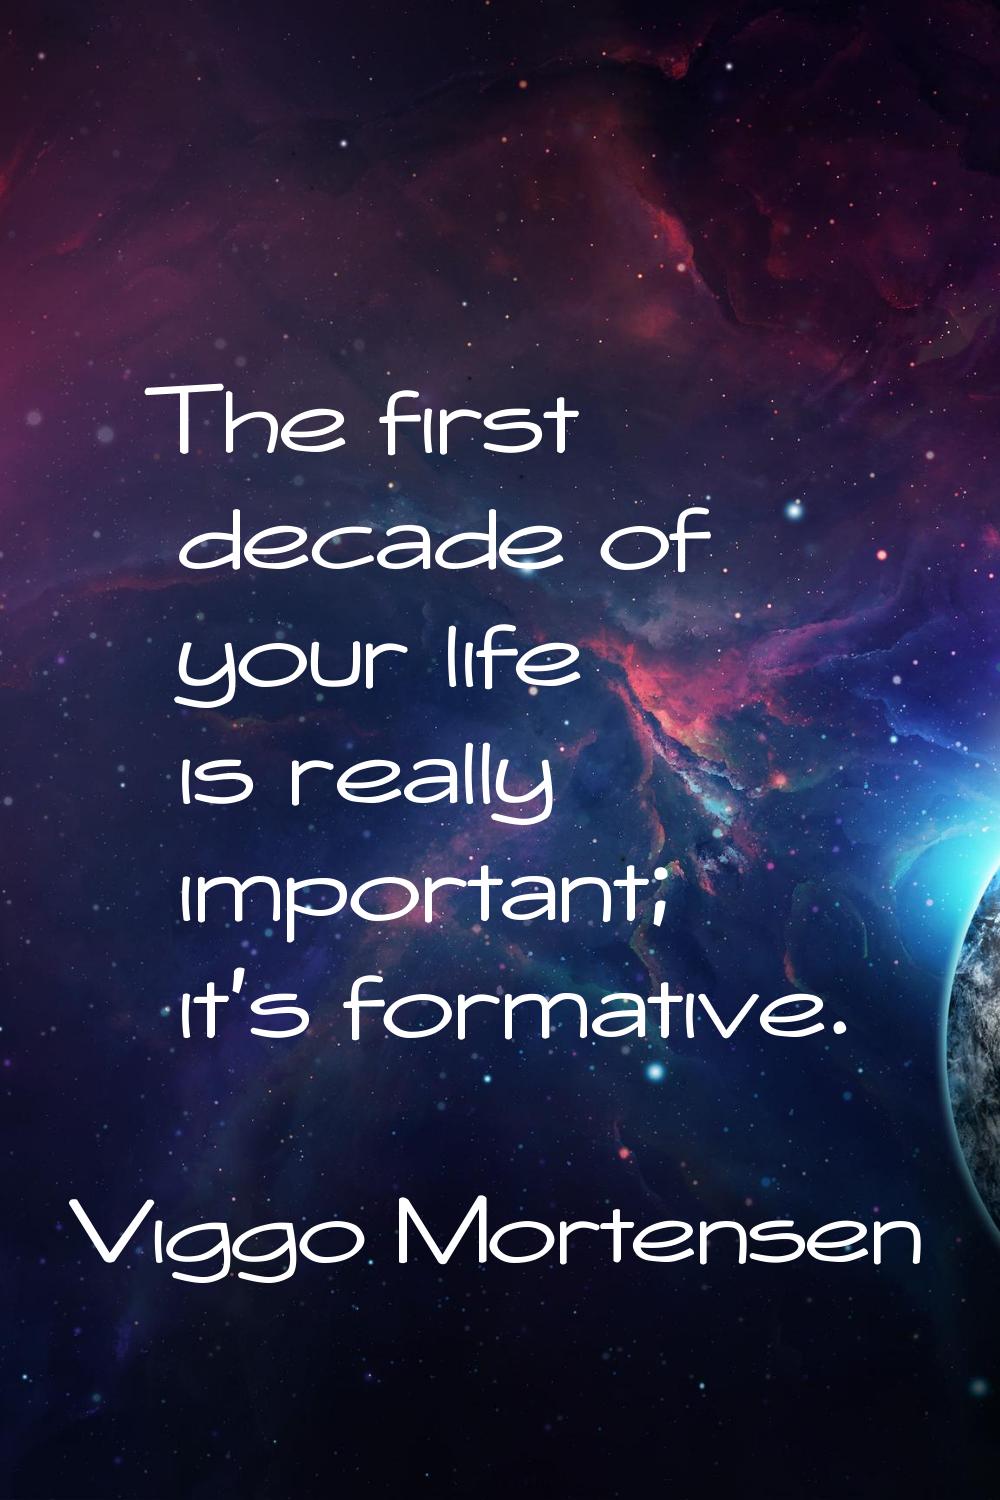 The first decade of your life is really important; it's formative.